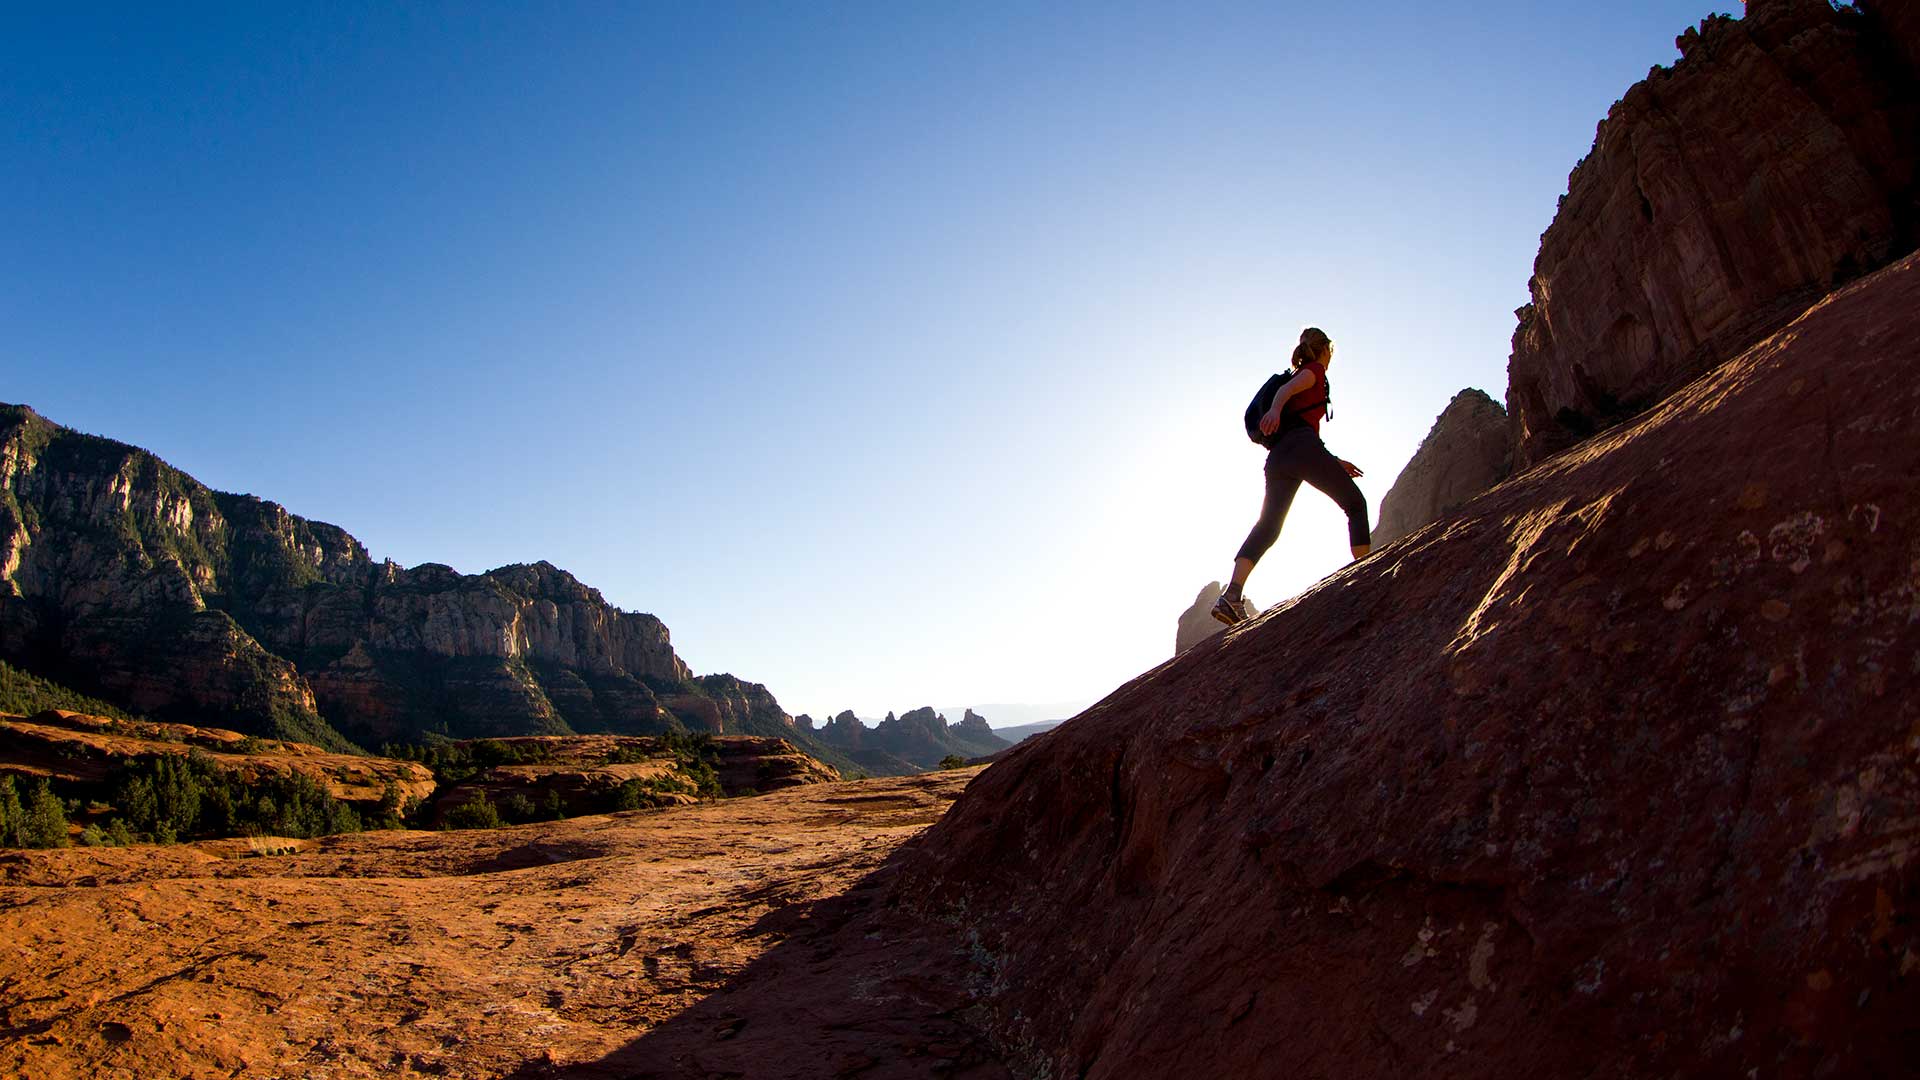 A hiker with a backpack ascends a steep, rocky trail with majestic mountains under a clear blue sky in the background.